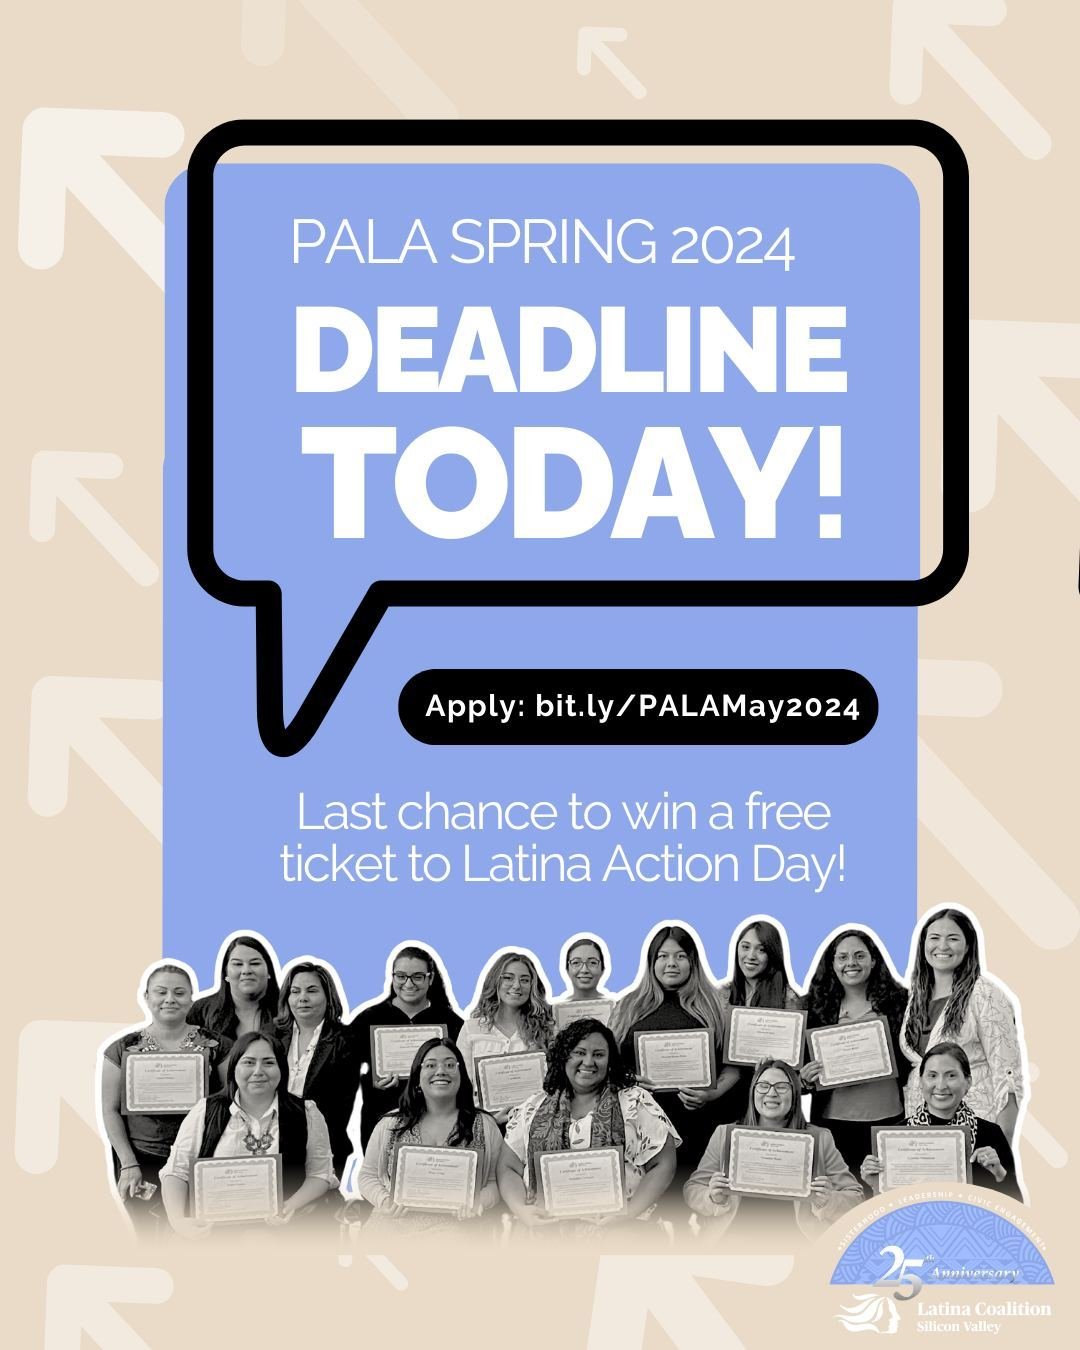 ⏳ PALA applications close TONIGHT at 11:59 PM! 

🎟️ This is your last chance to be entered to win a FREE ticket to Latina Action Day! 

👉 Use the link in bio to apply

#PALA #LCSV #LatinaCoalitionSV